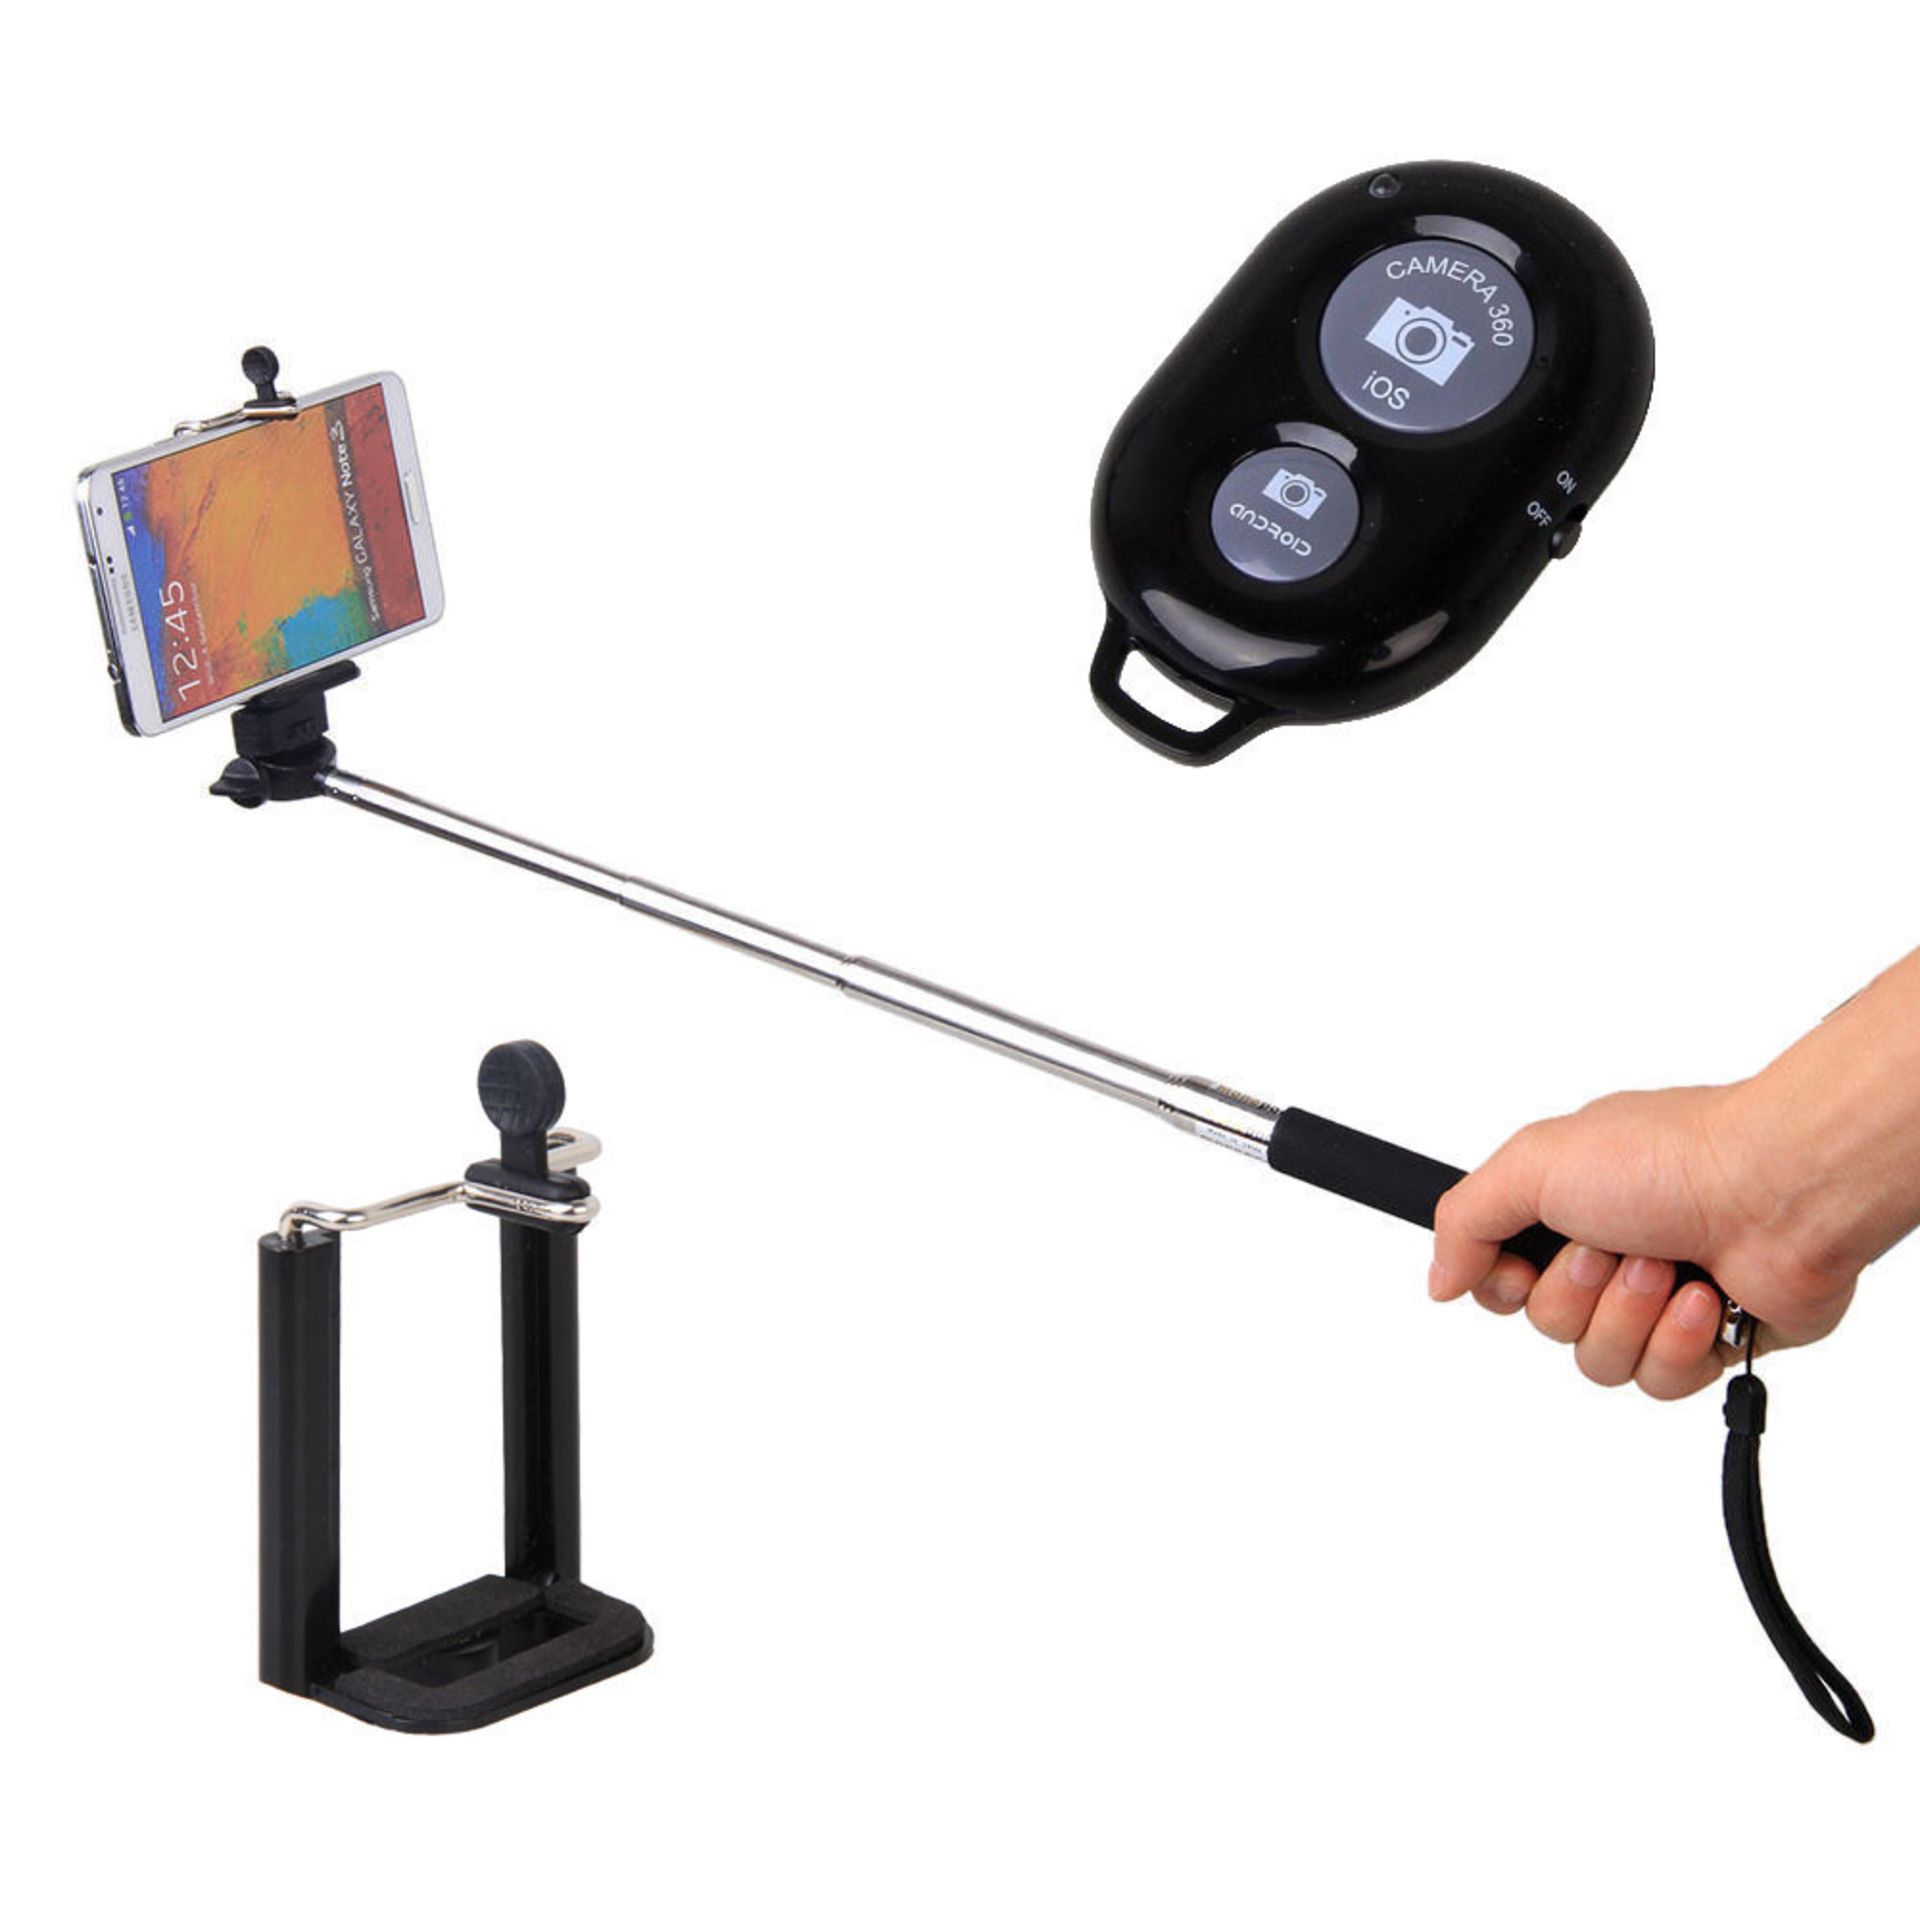 V *TRADE QTY* Brand New Selfie Stick with Bluetooth Remote Control - RRP £19.09 X 8 YOUR BID PRICE